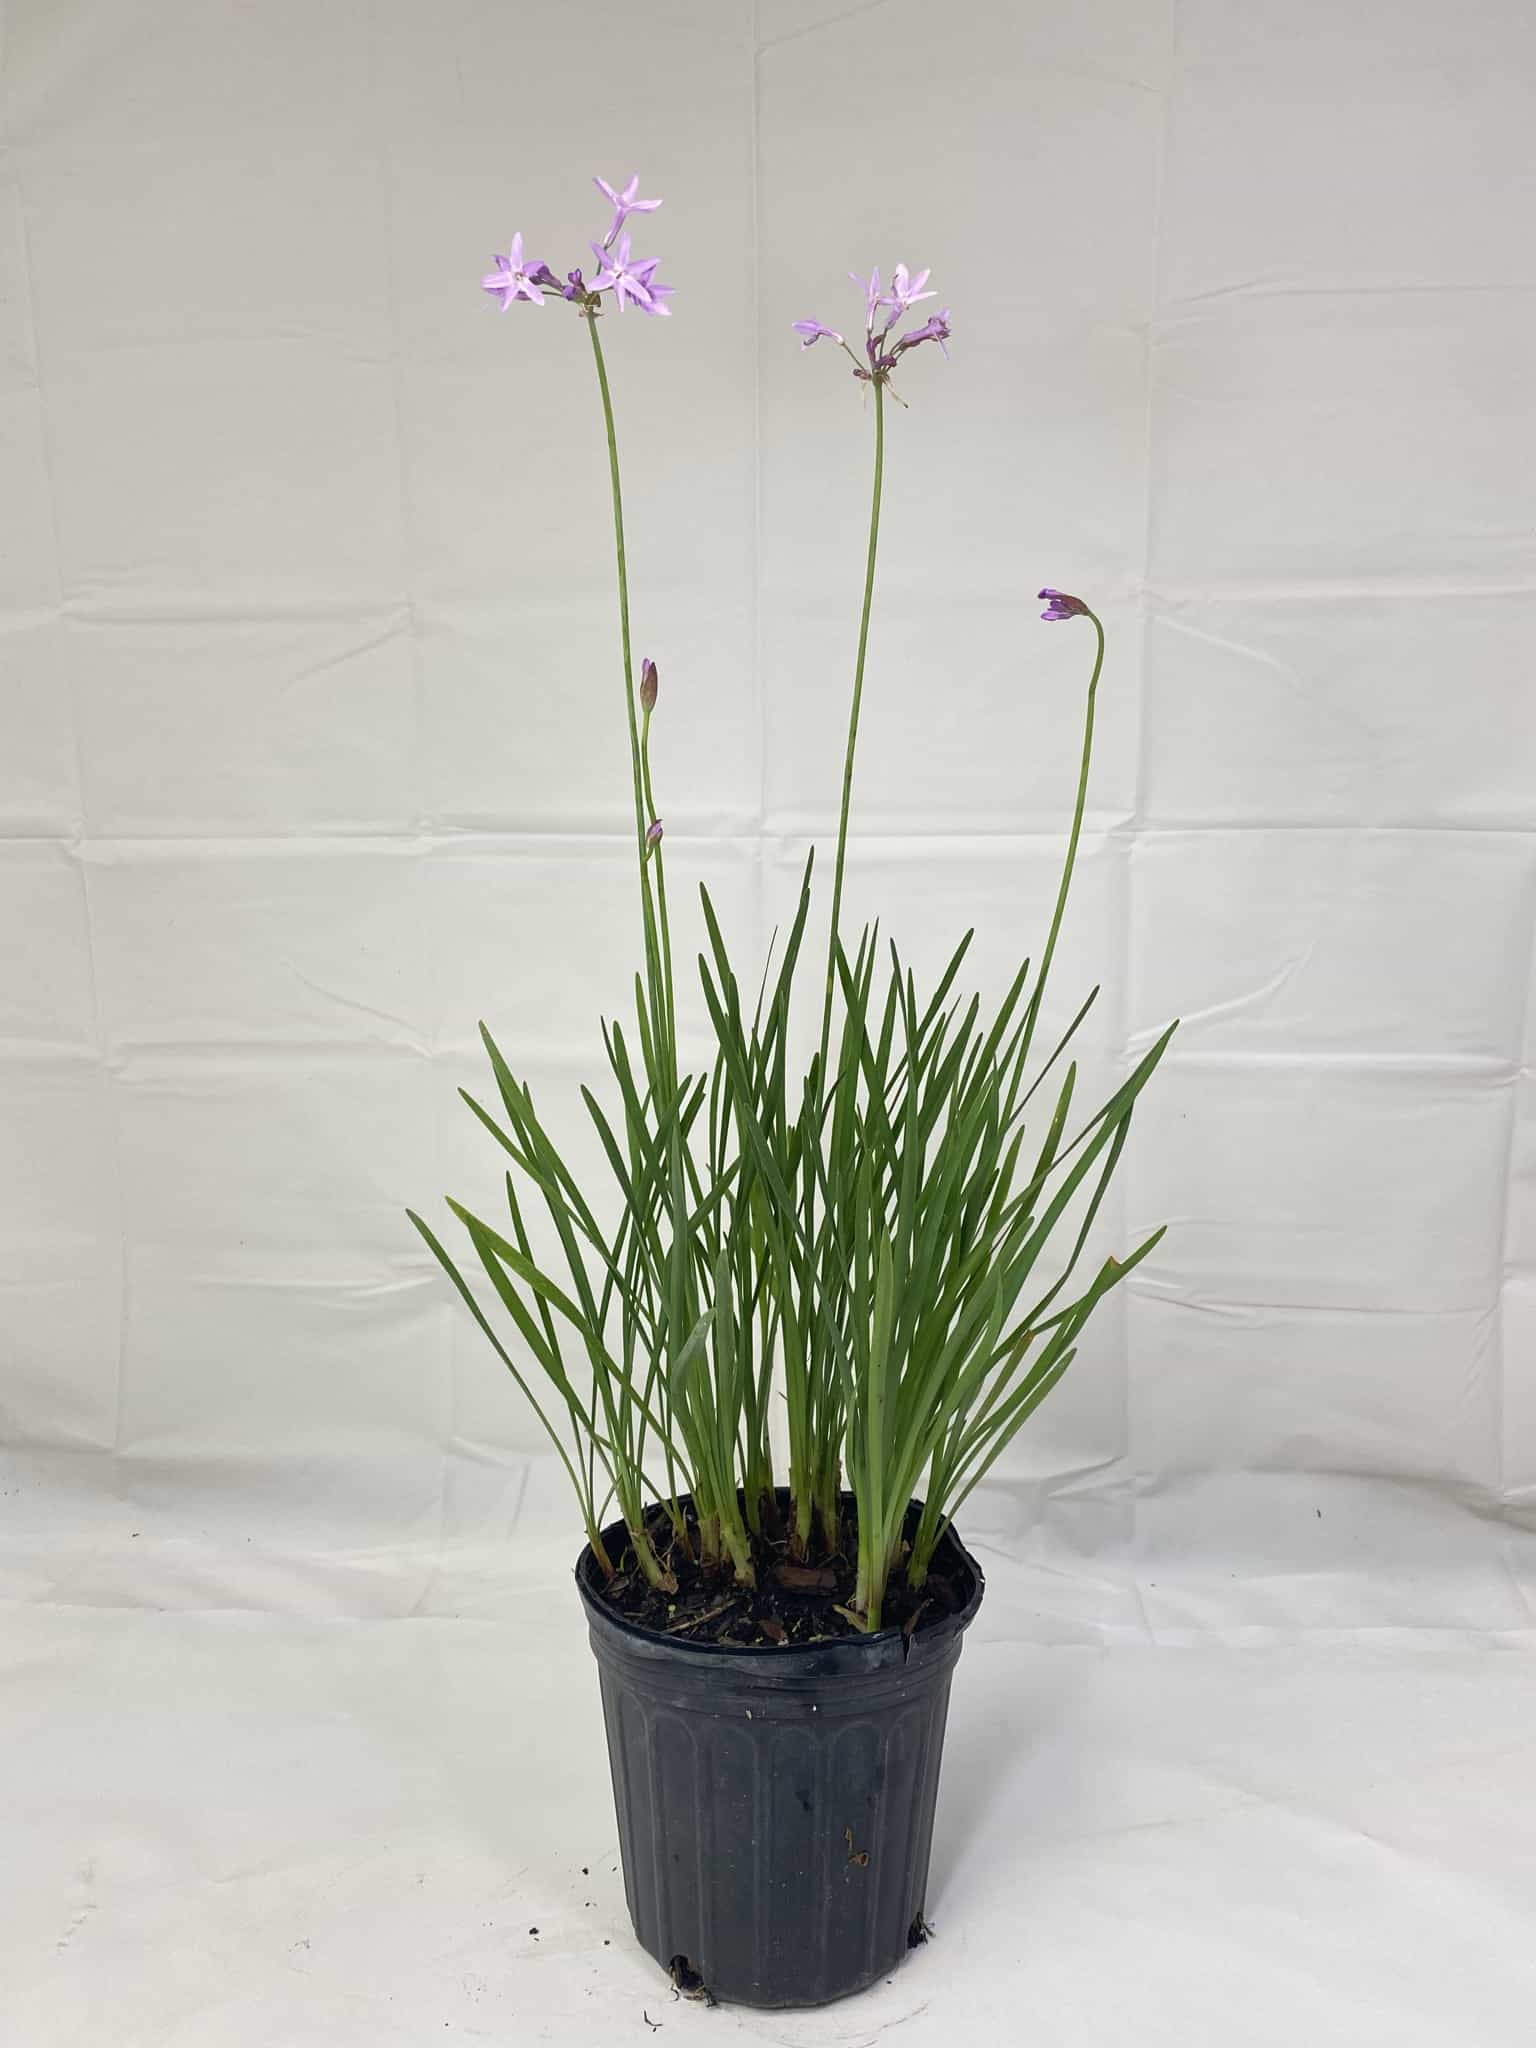 Details about   Live Society Garlic aka Tulbaghia violacea green Perennial Plant Fit 1Gallon Pot 